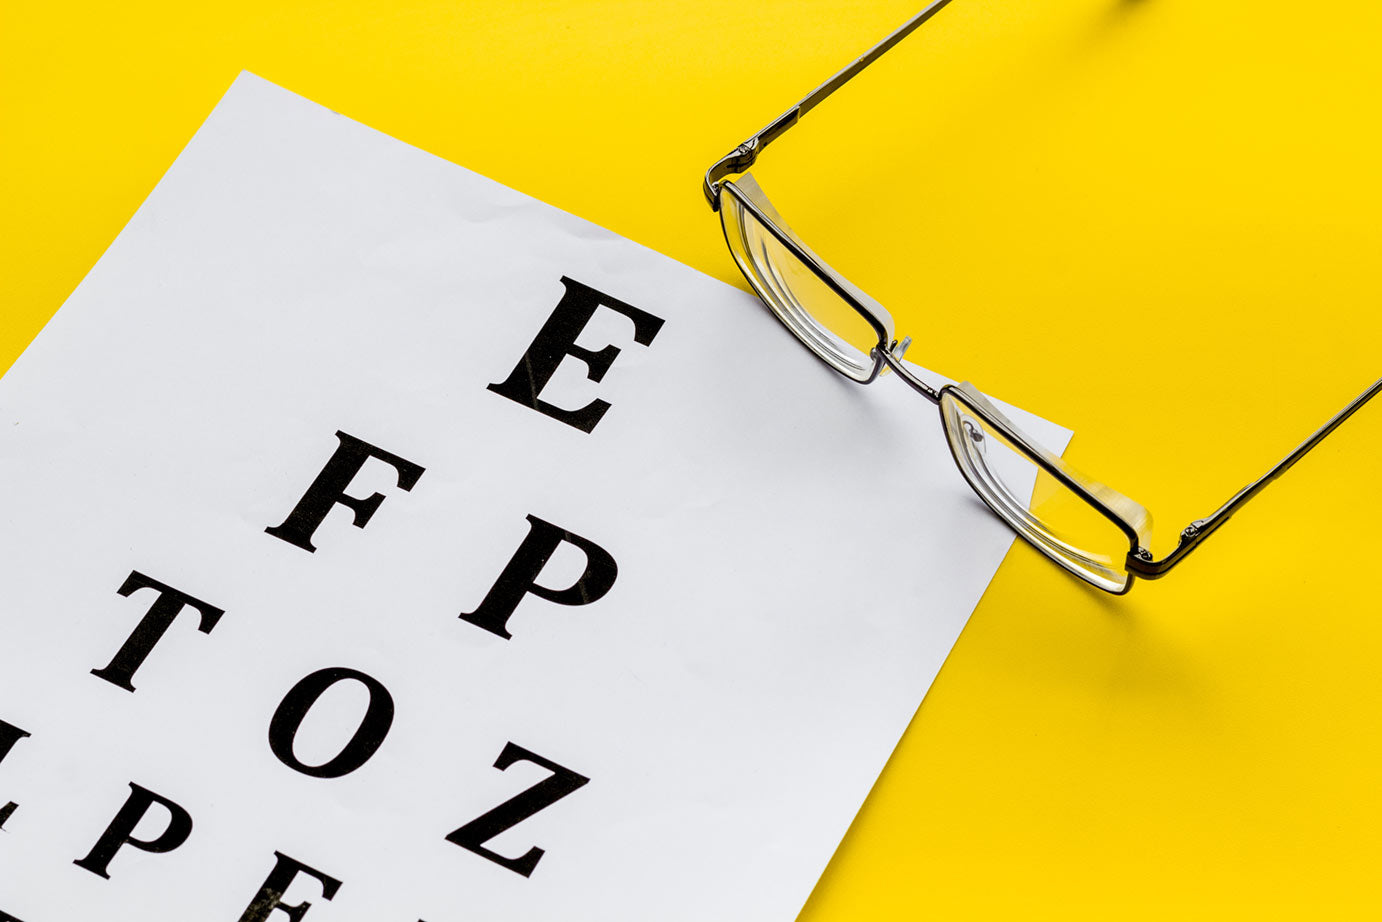 Snellen chart on yellow background with glasses laying on a table.